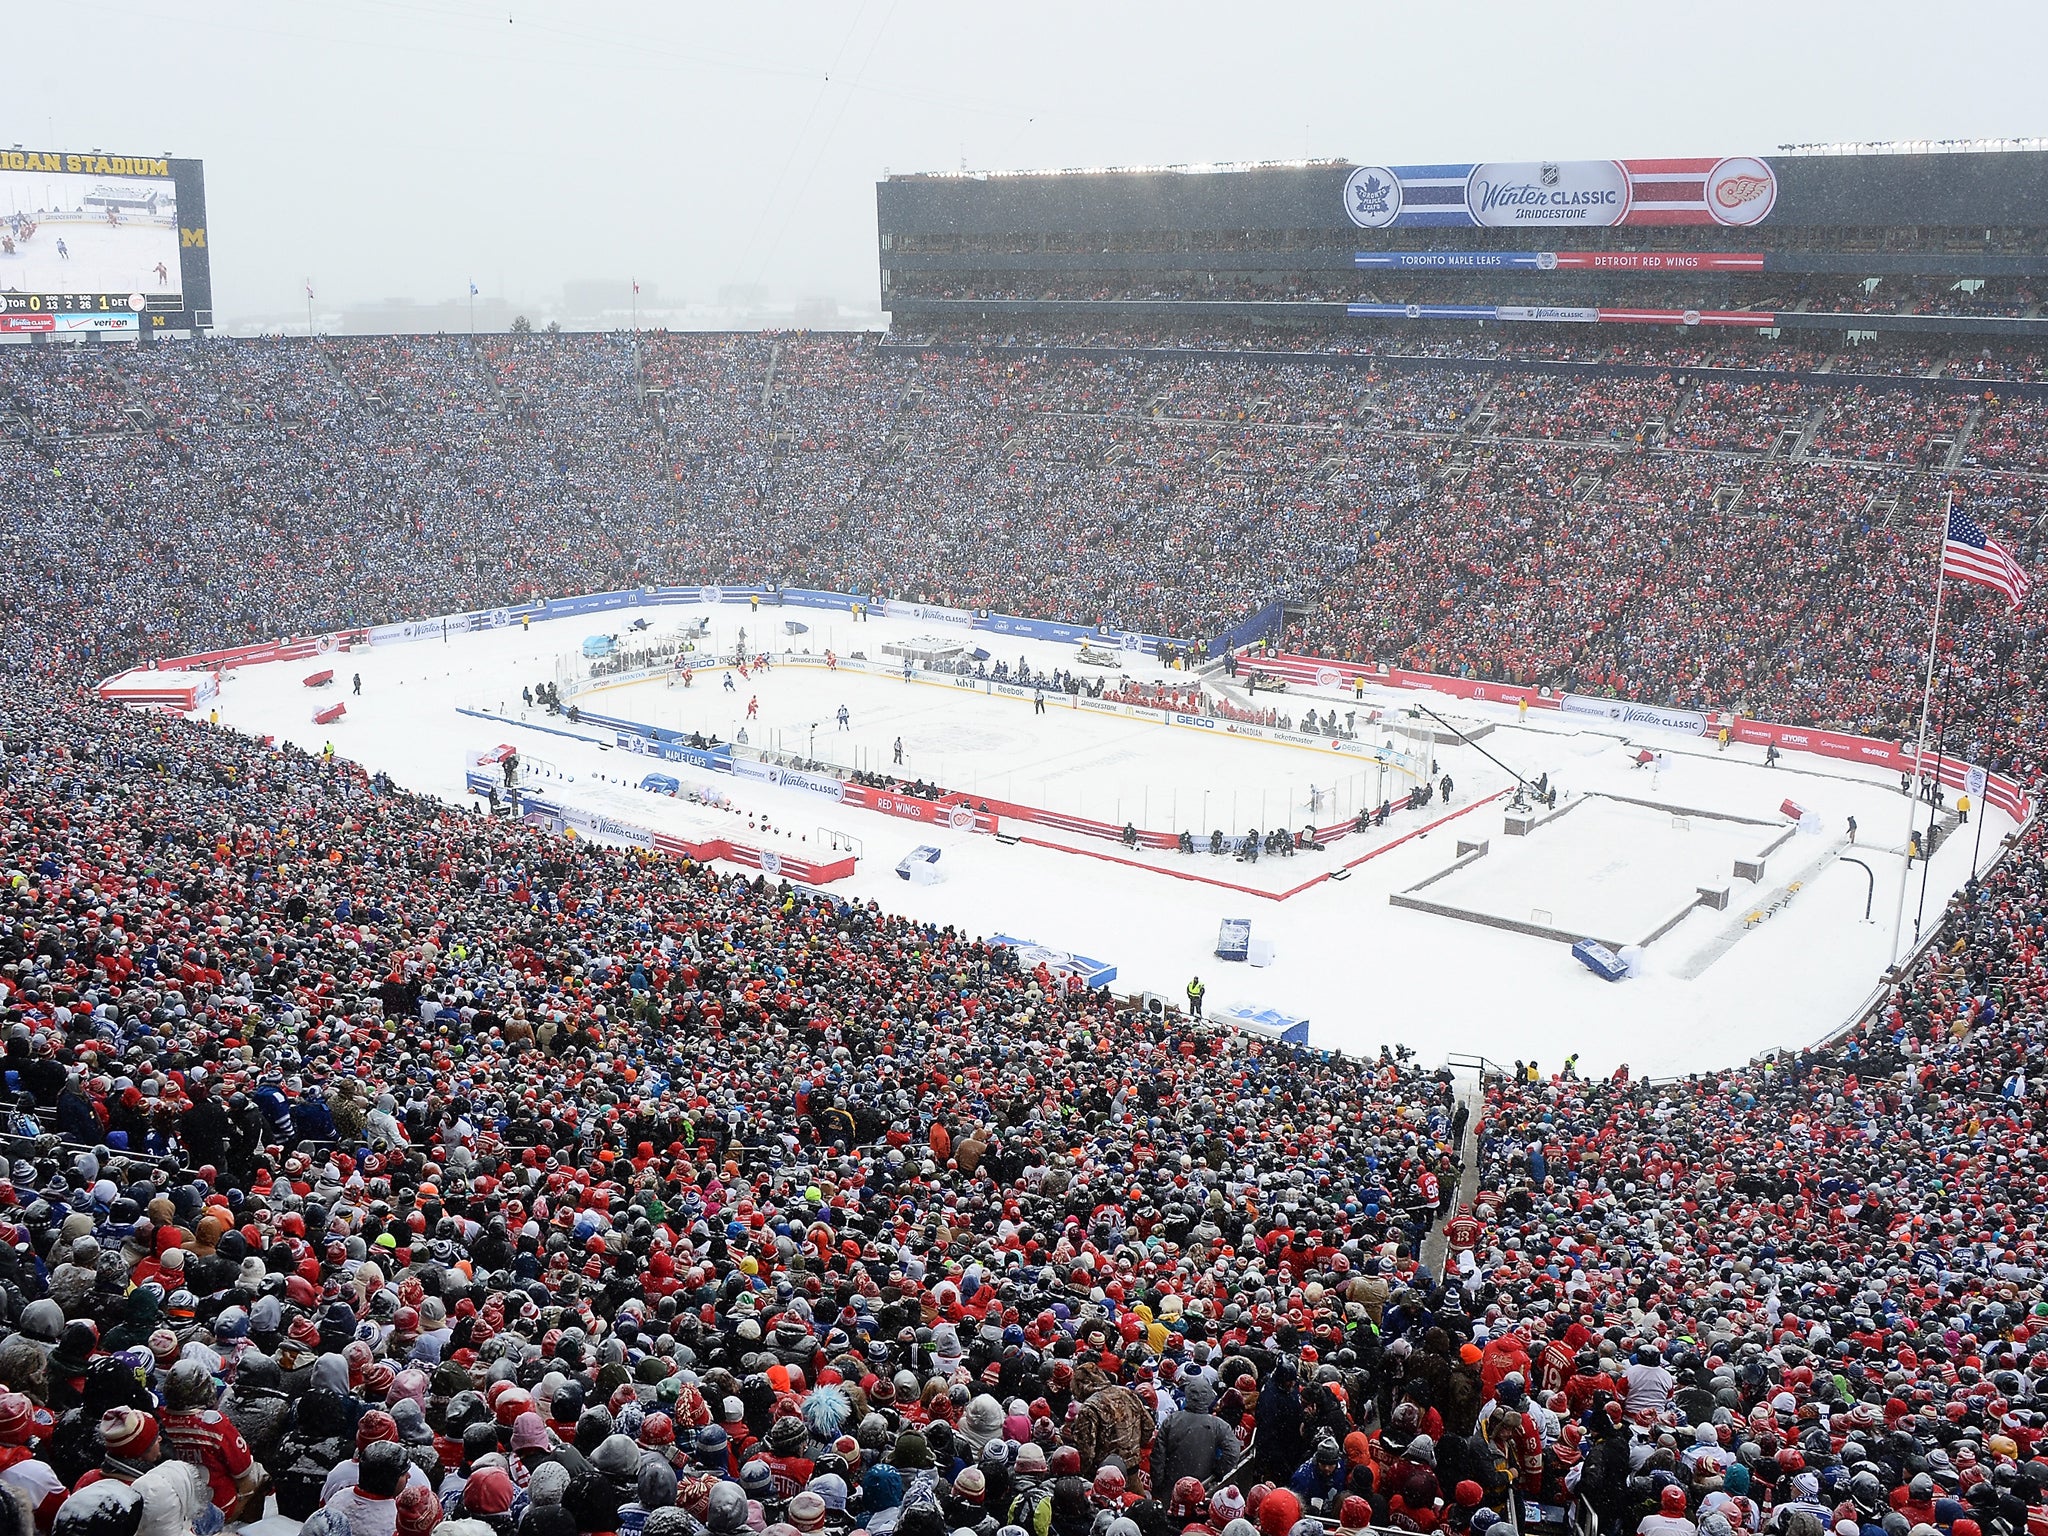 Detroit Red Wings-Toronto Maple Leafs to meet in 2014 NHL Winter Classic at  Michigan Stadium 